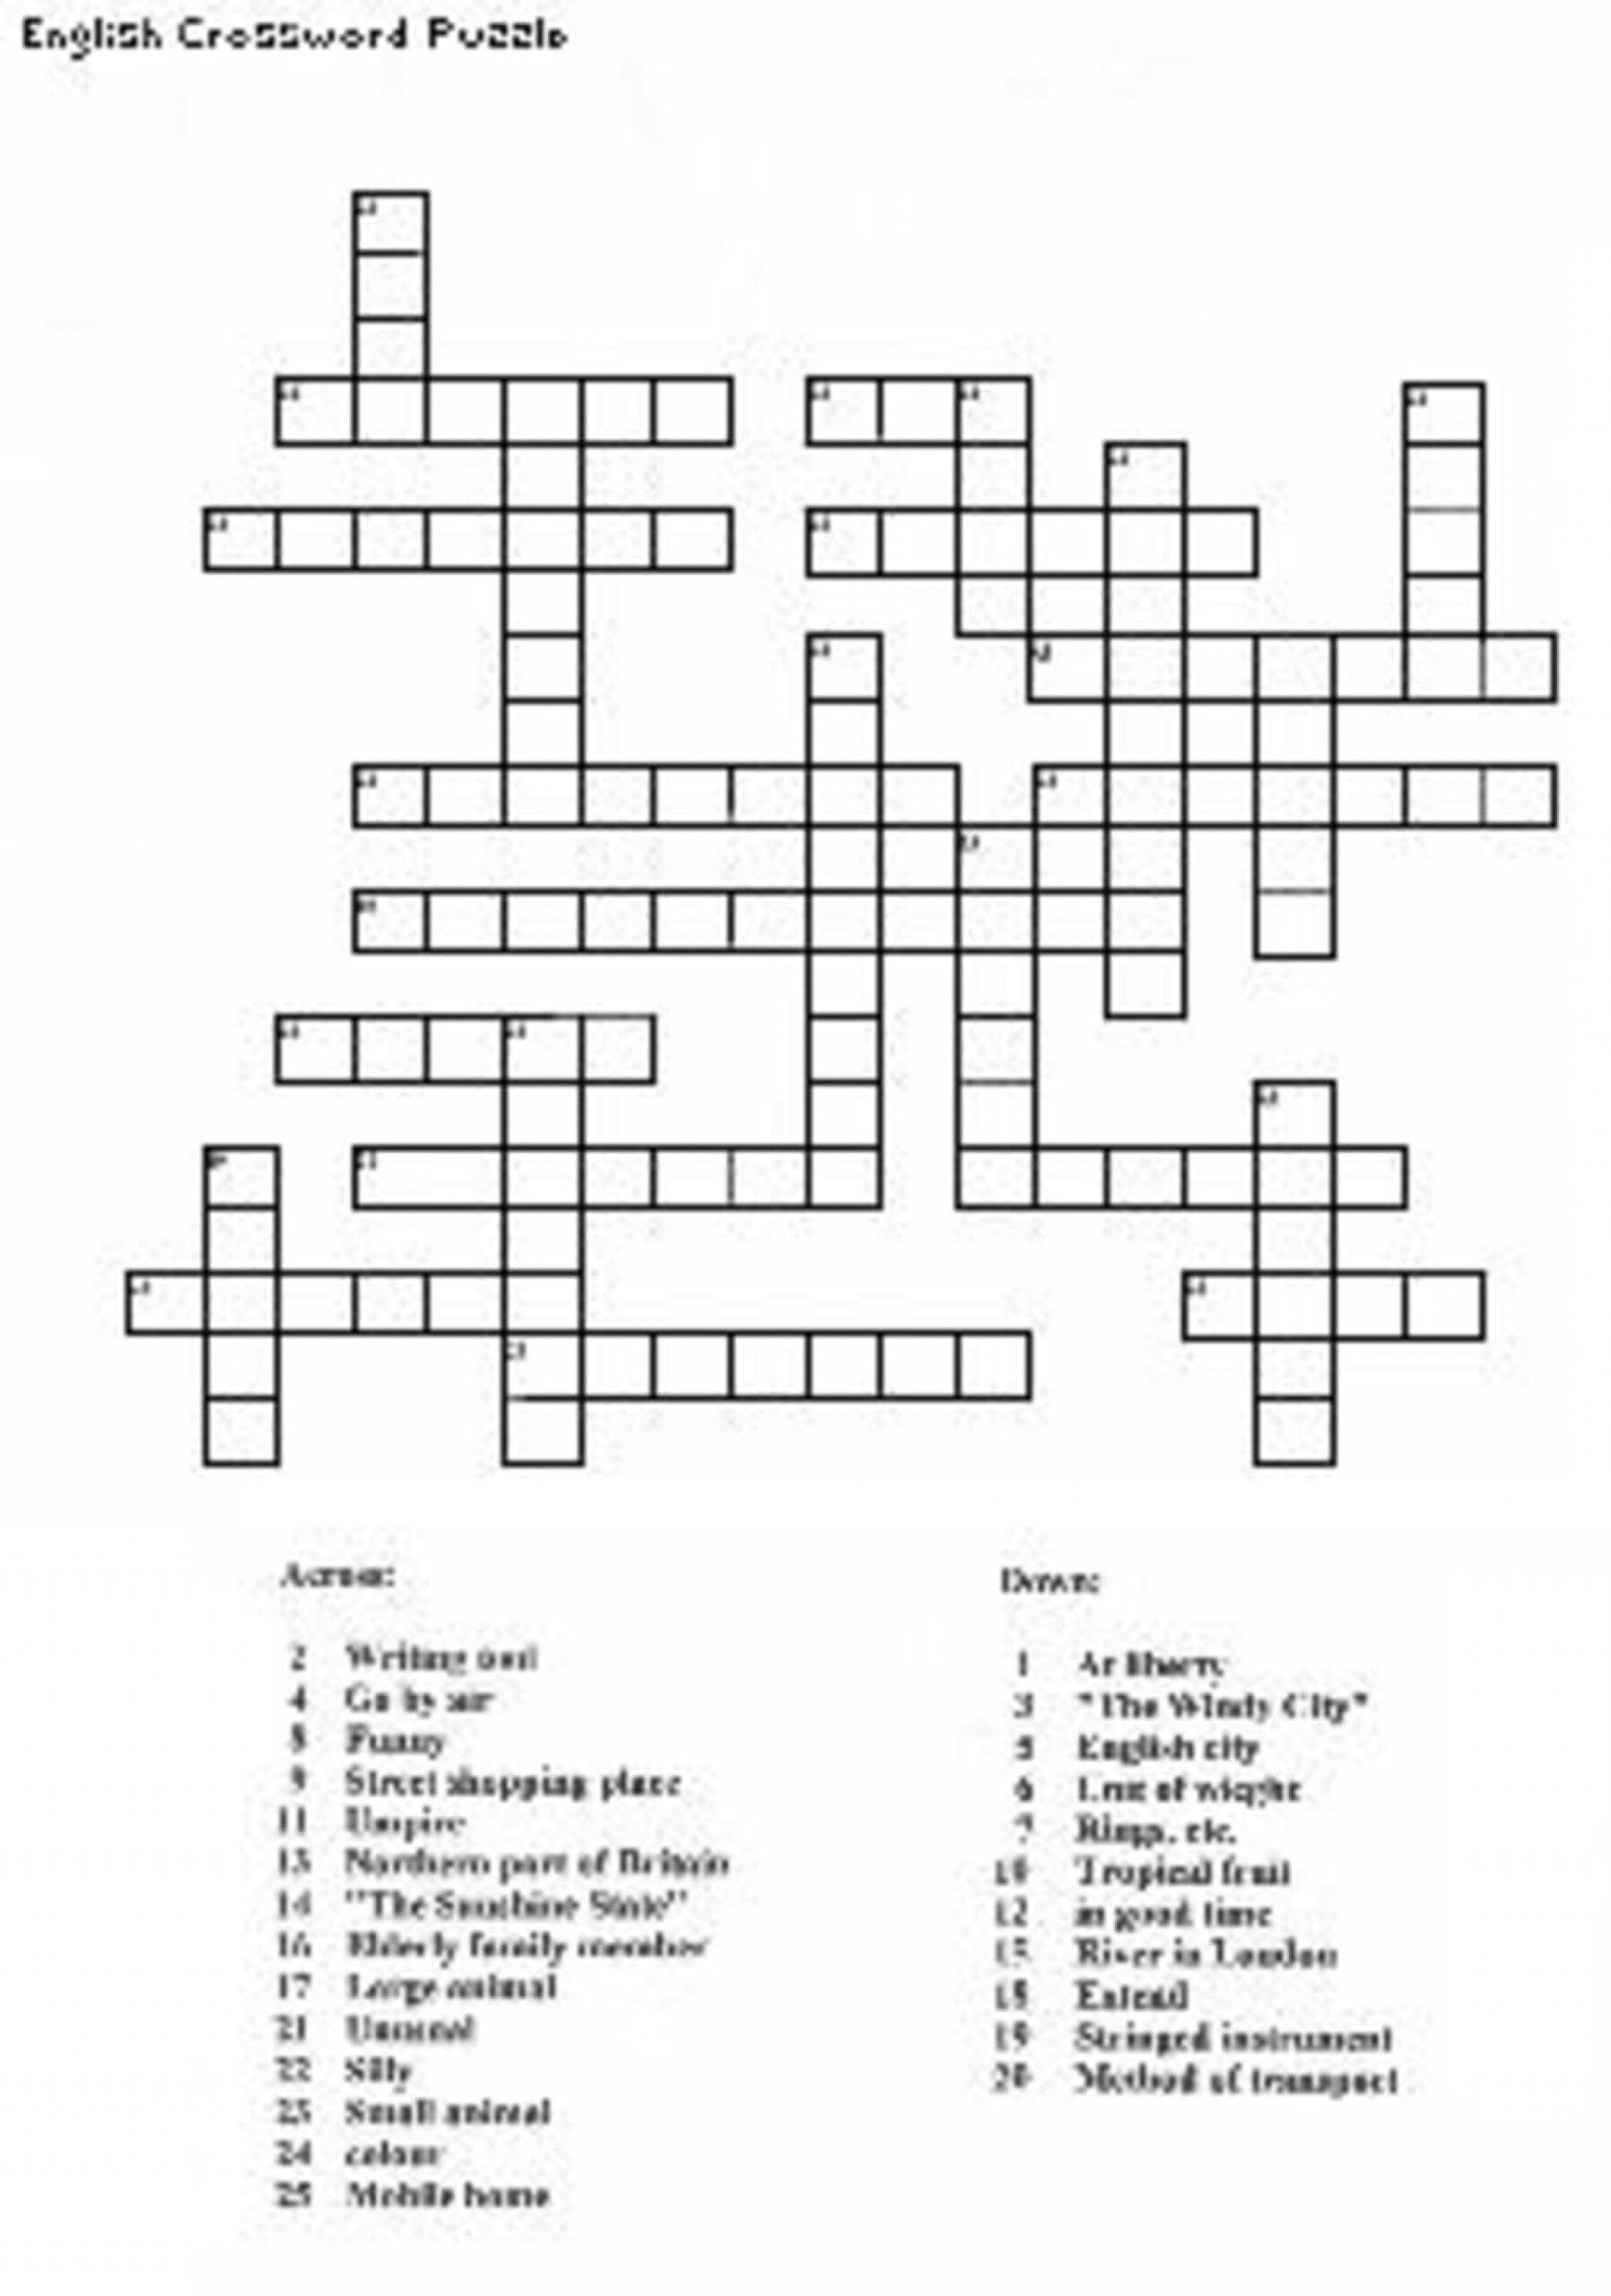 Make Your Own Crossword Puzzle Free Printable Printable Crossword Puzzles - Easy Crossword Puzzle Maker